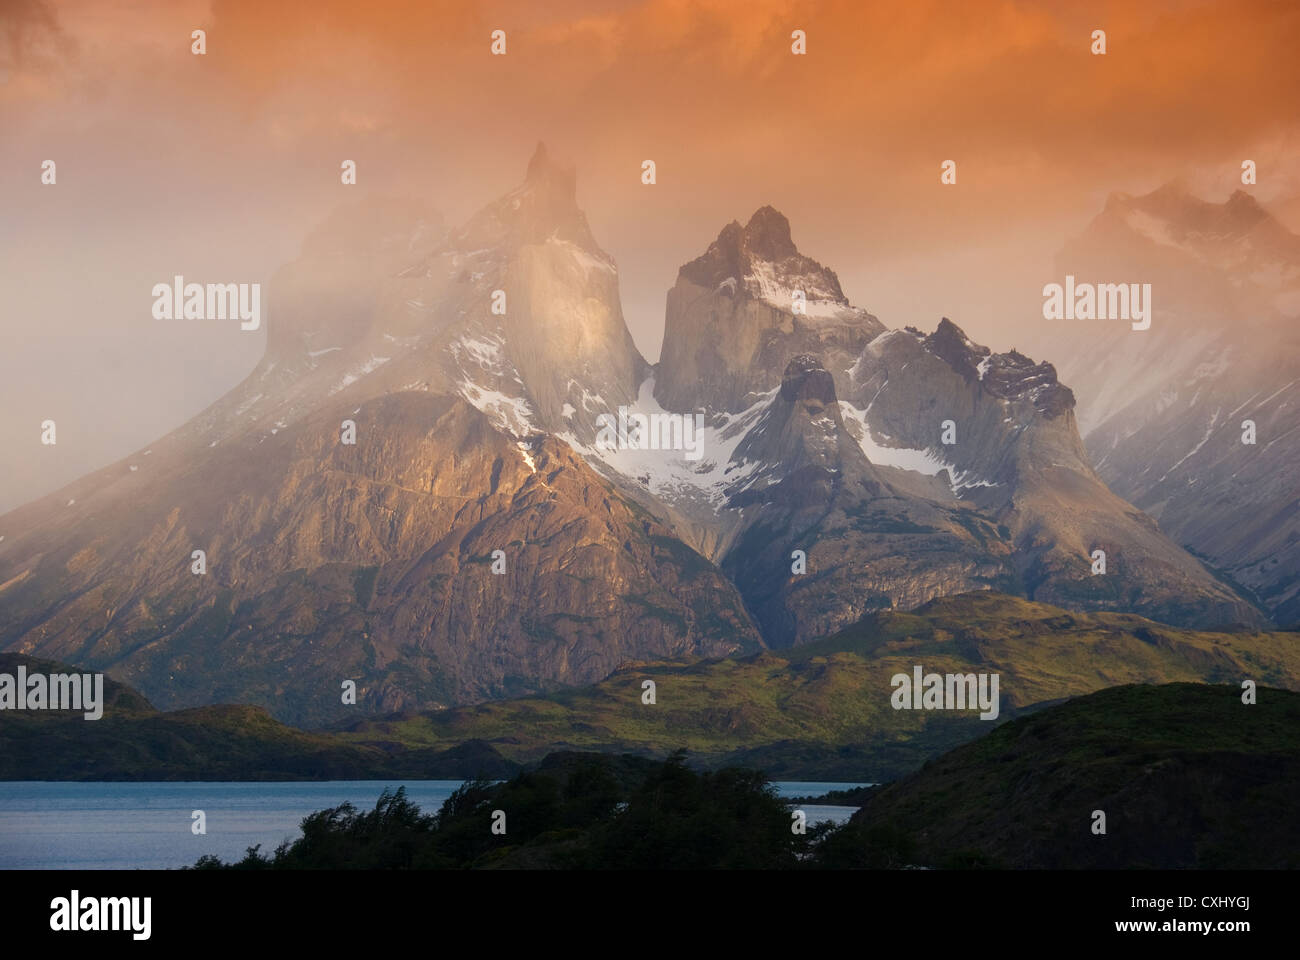 Elk198-4413 Chile, Patagonia, Torres del Paine NP, Cuernos massif with Lago Pehoe, sunrise on Andes Stock Photo